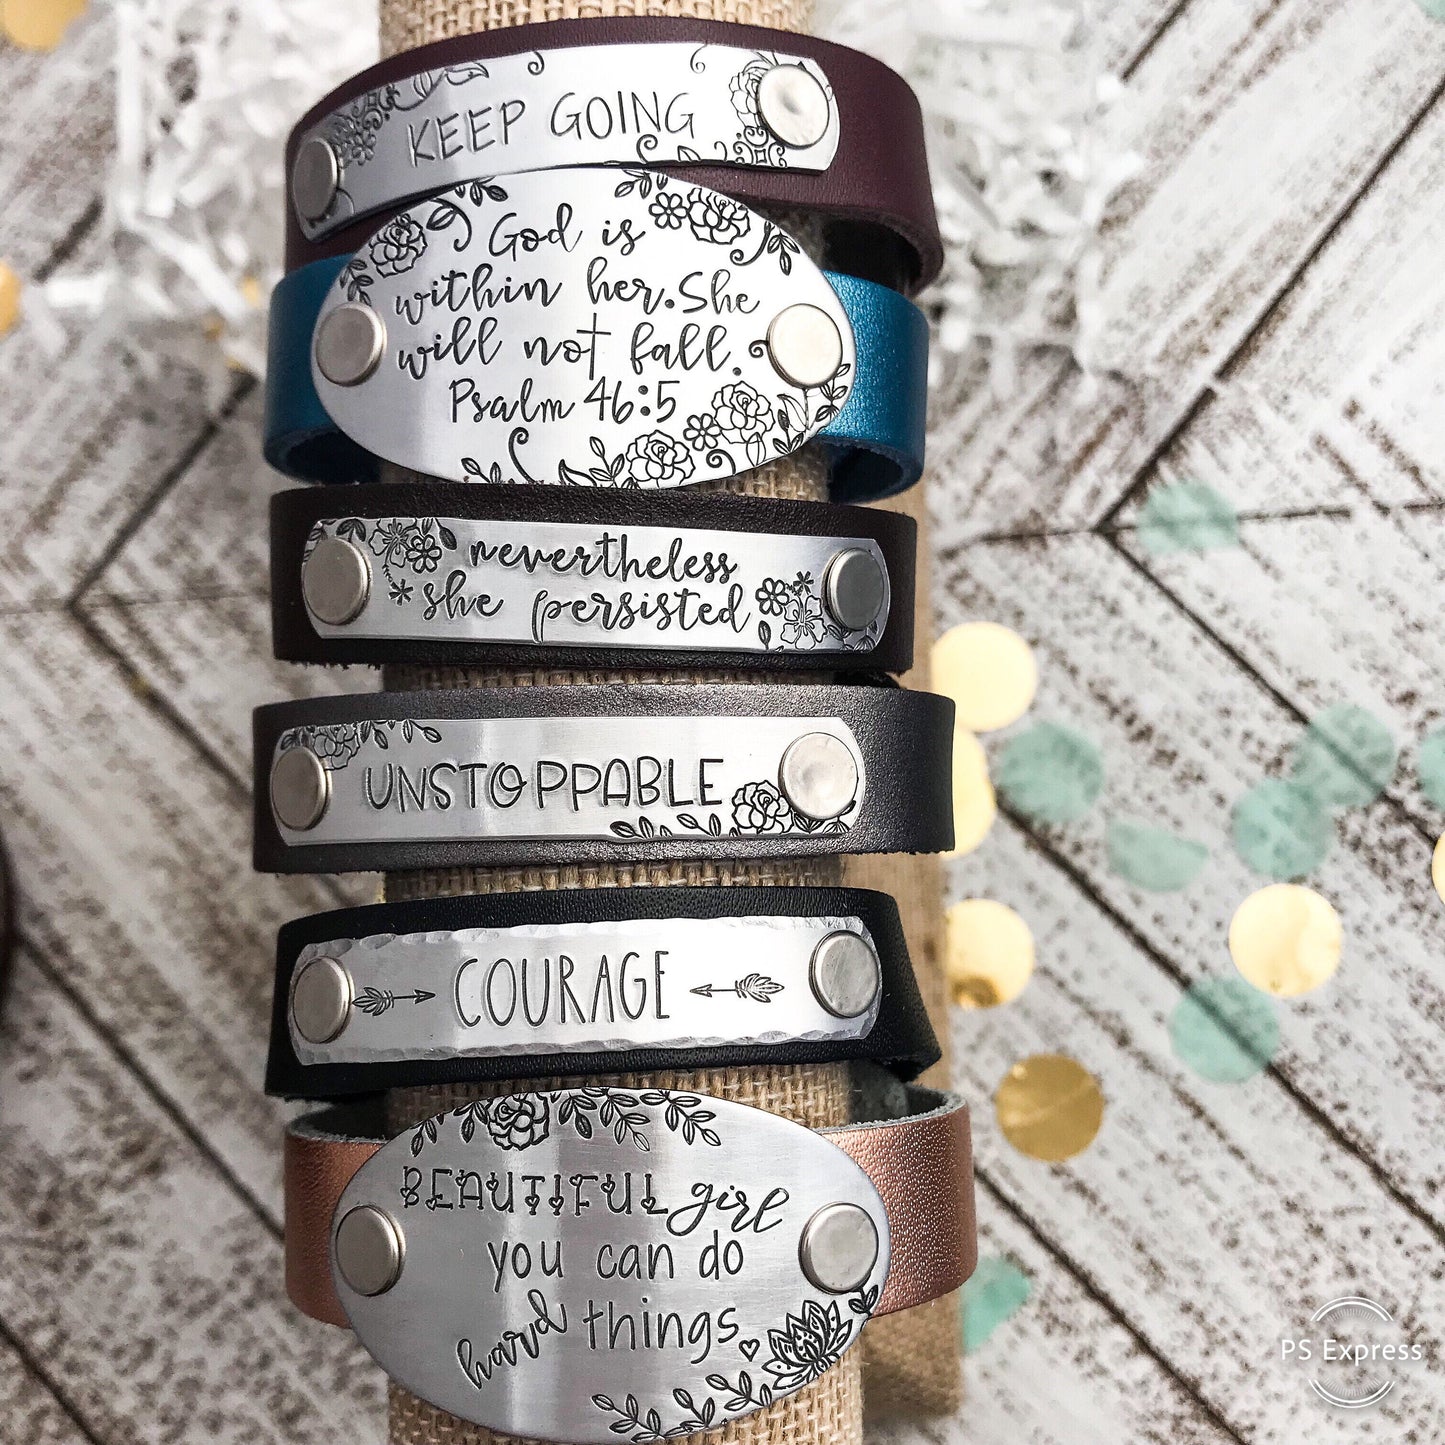 Storms Make Trees Take Deeper Roots Leather Cuff Bracelet--encouragement gift--inspirational jewelry--Stronger than Yesterday--Stay Strong